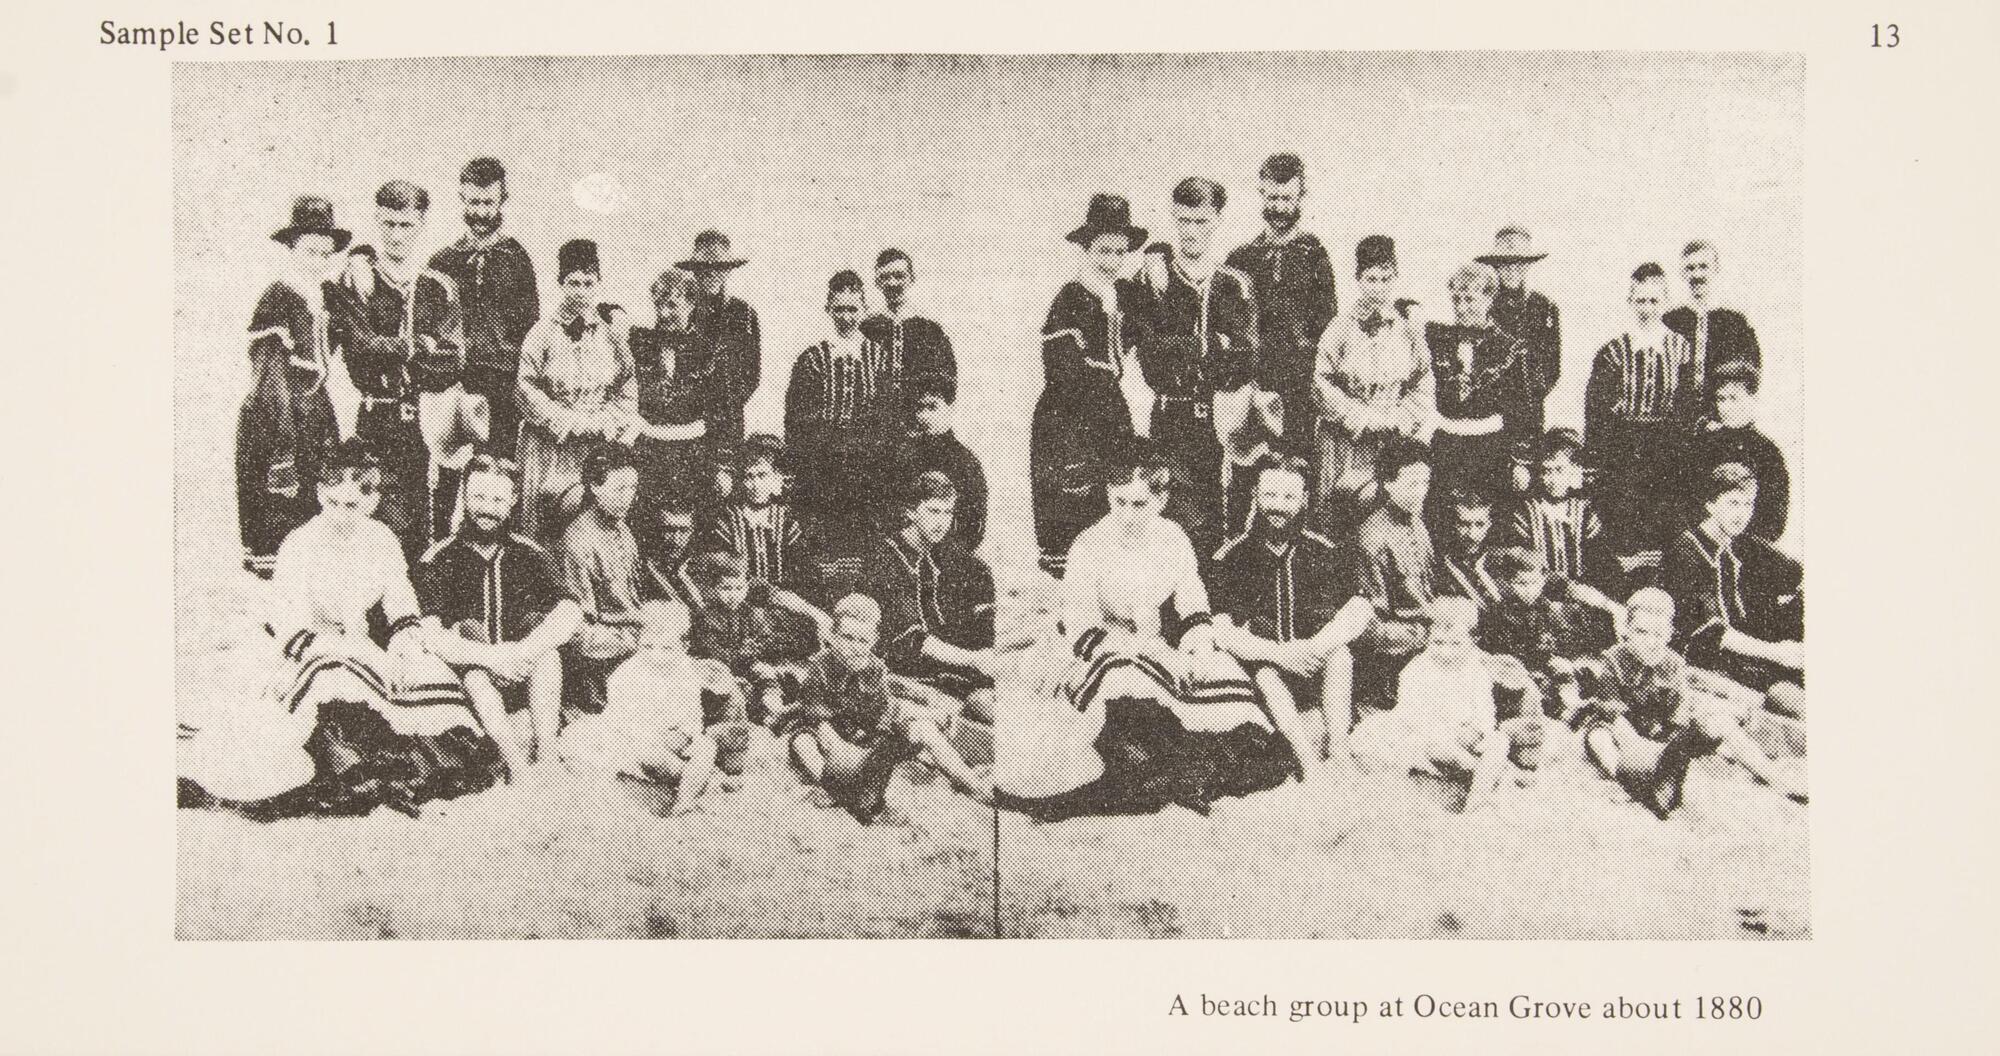 This black and white stereoscopic image features two images of a view of adults and children grouped in the sand on a beach.  It is surrounded by the text: Sample Set No. 1; A beach group at Ocean Grove about 1880.<br />